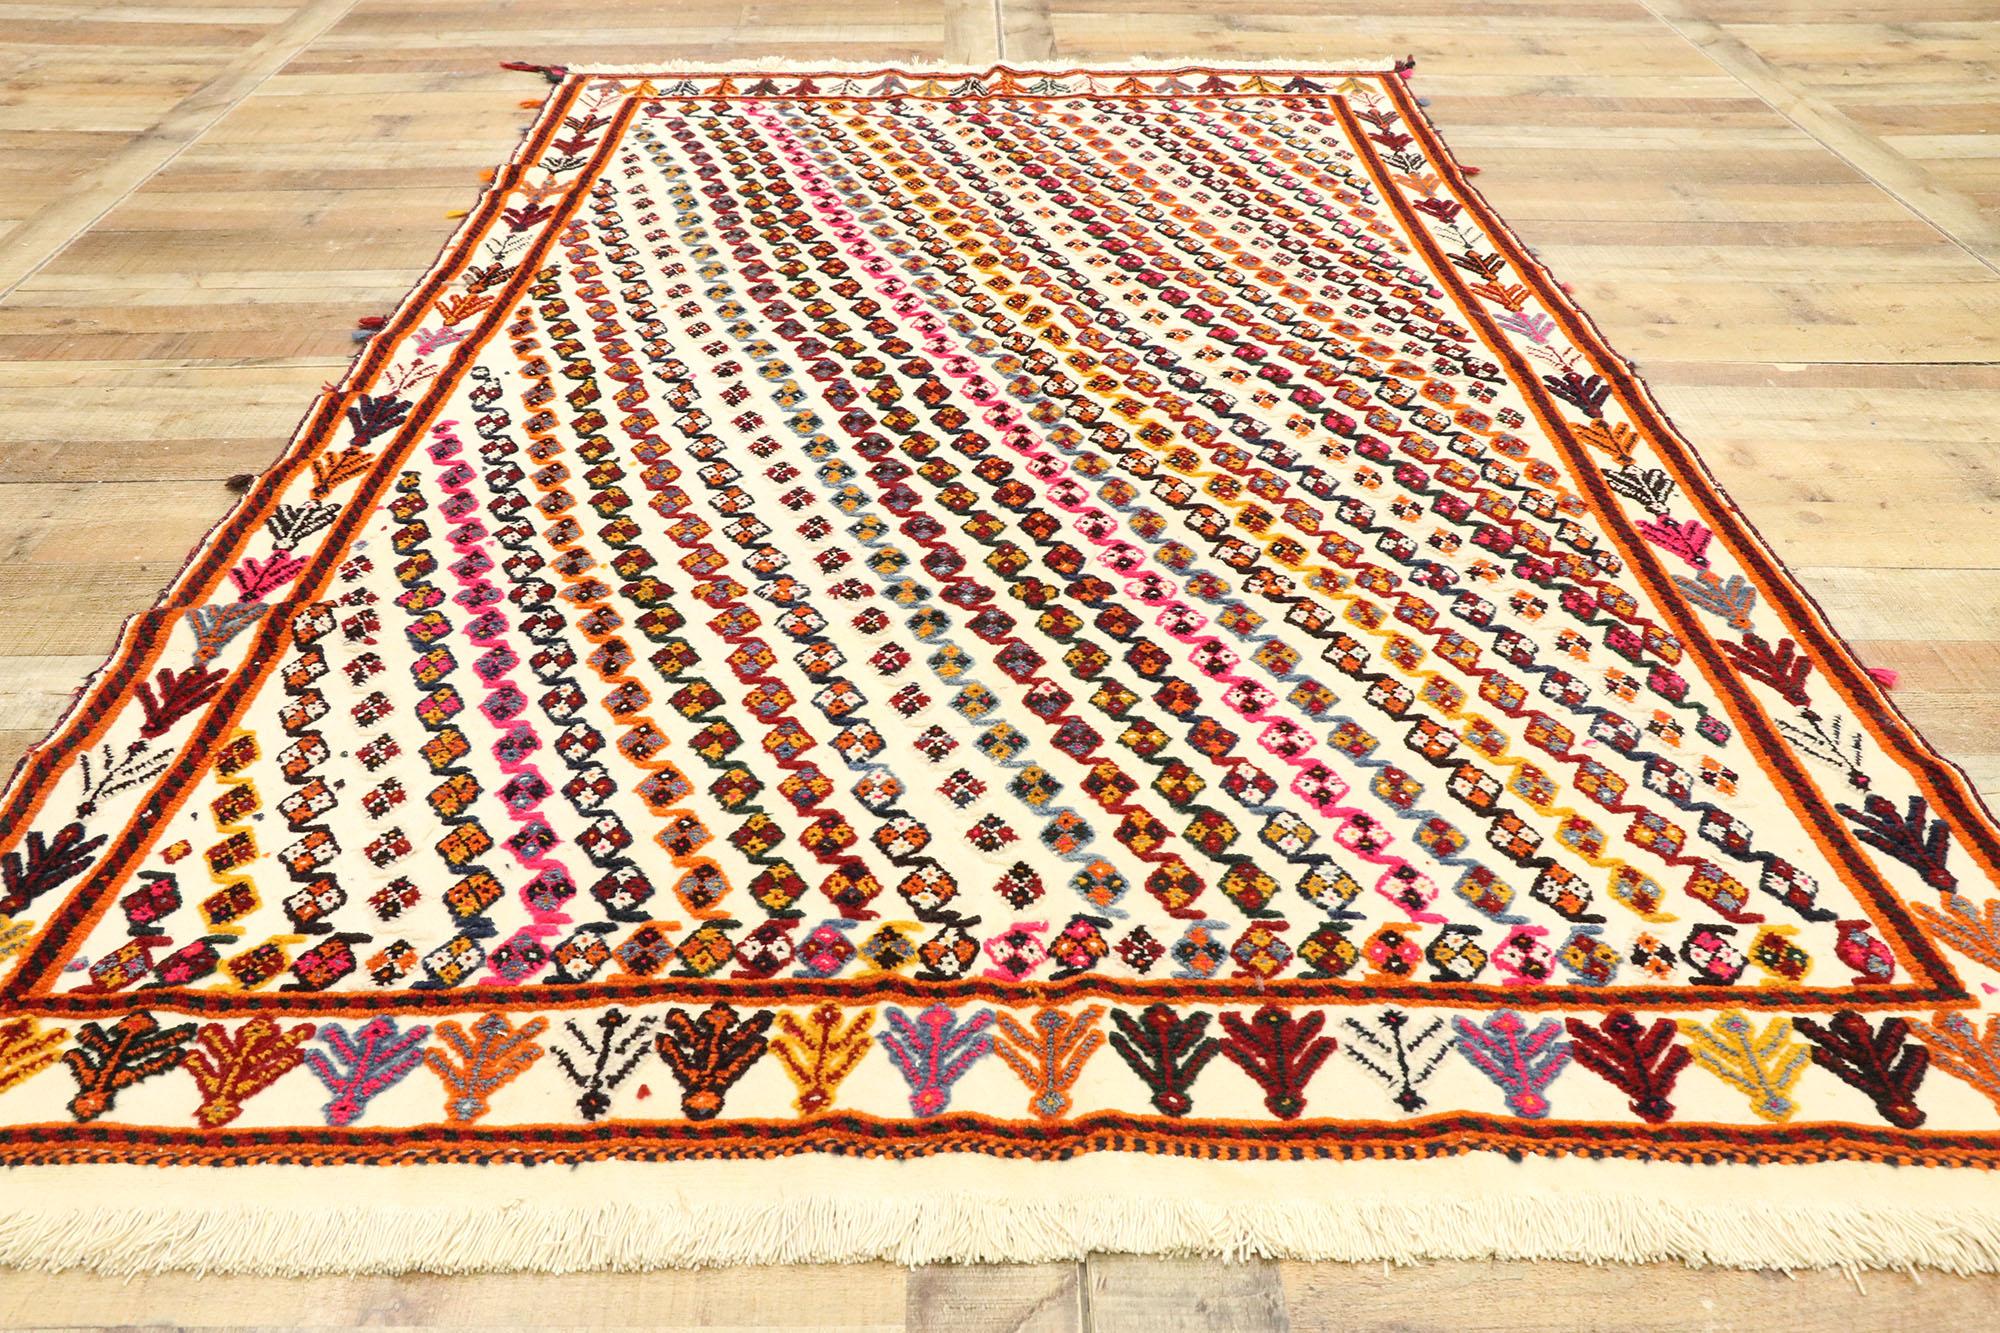 Wool Vintage Moroccan Souf Kilim Rug with Boho Chic Tribal Style, High-Low Rug For Sale